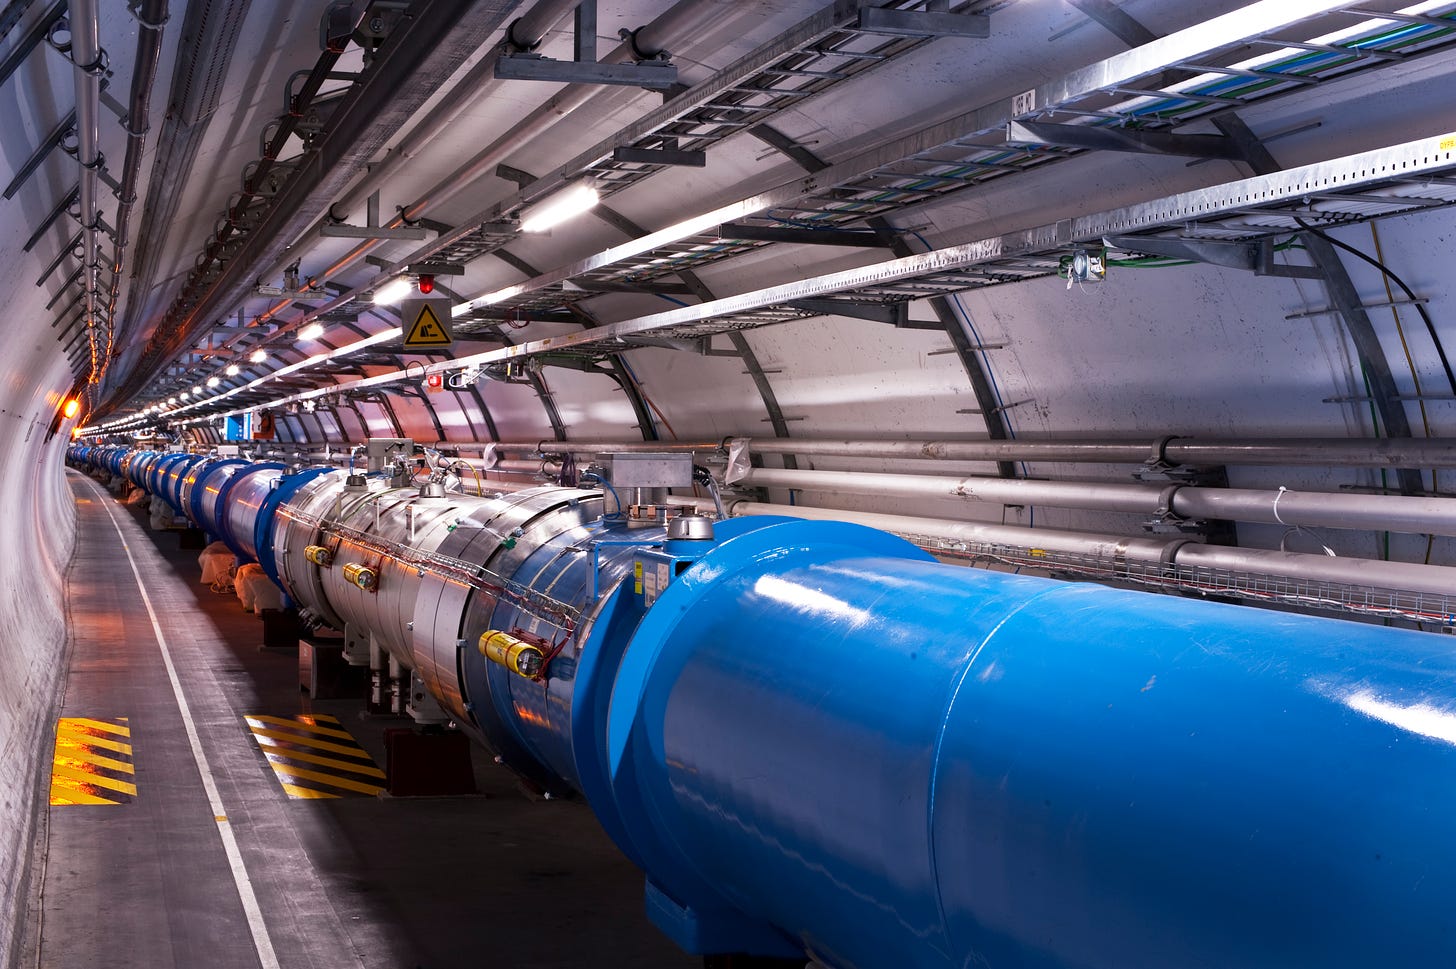 Photo of the Large Hadron Collider by CERN